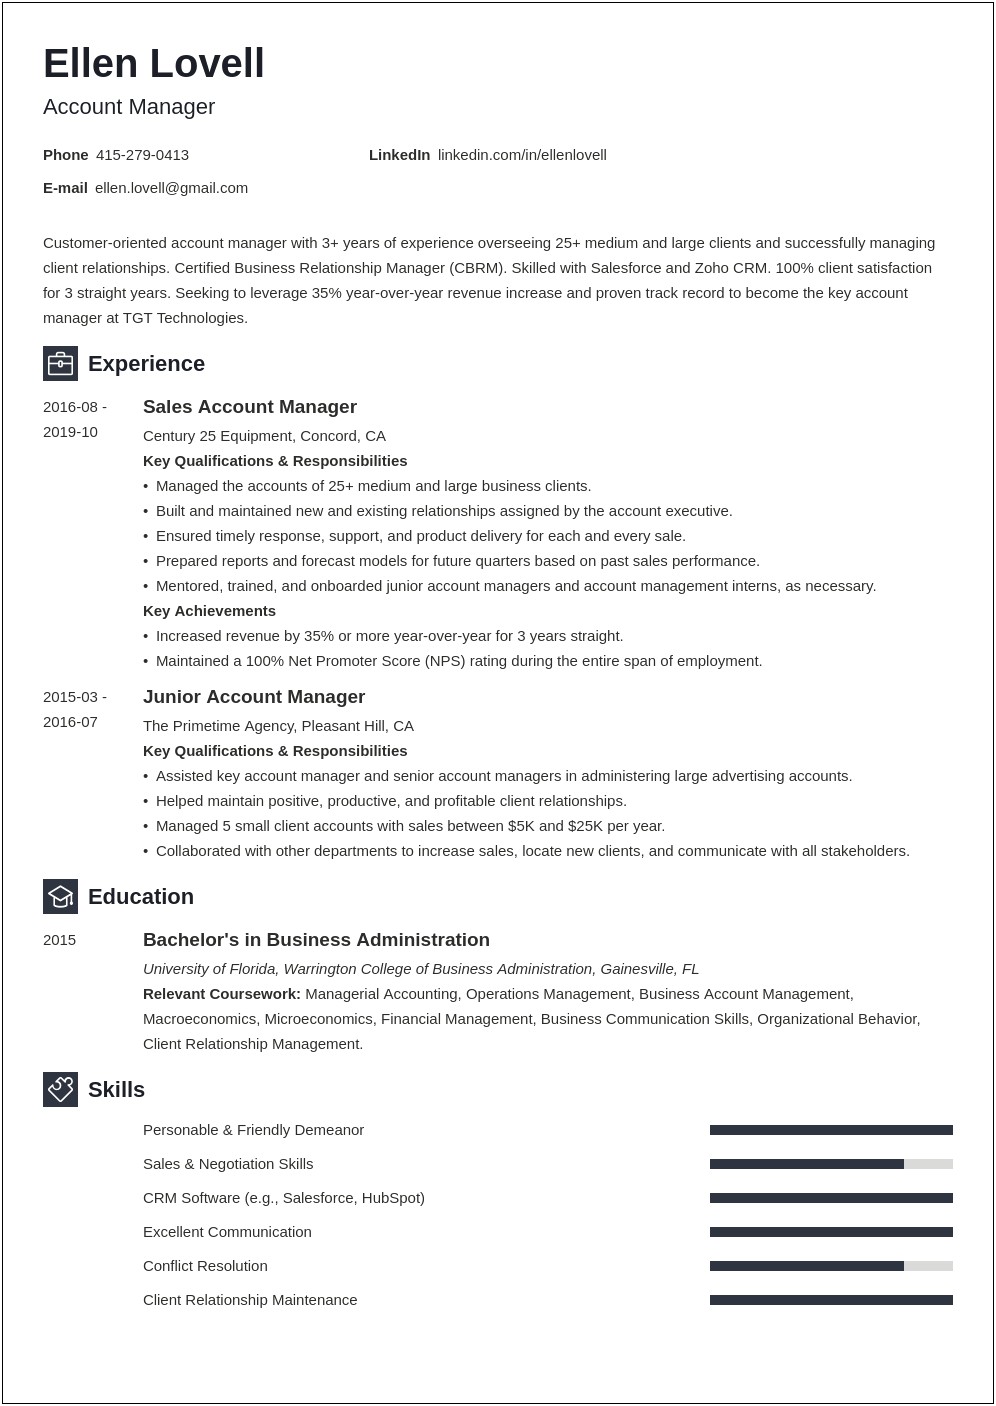 Account Manager Resume Objective Sample